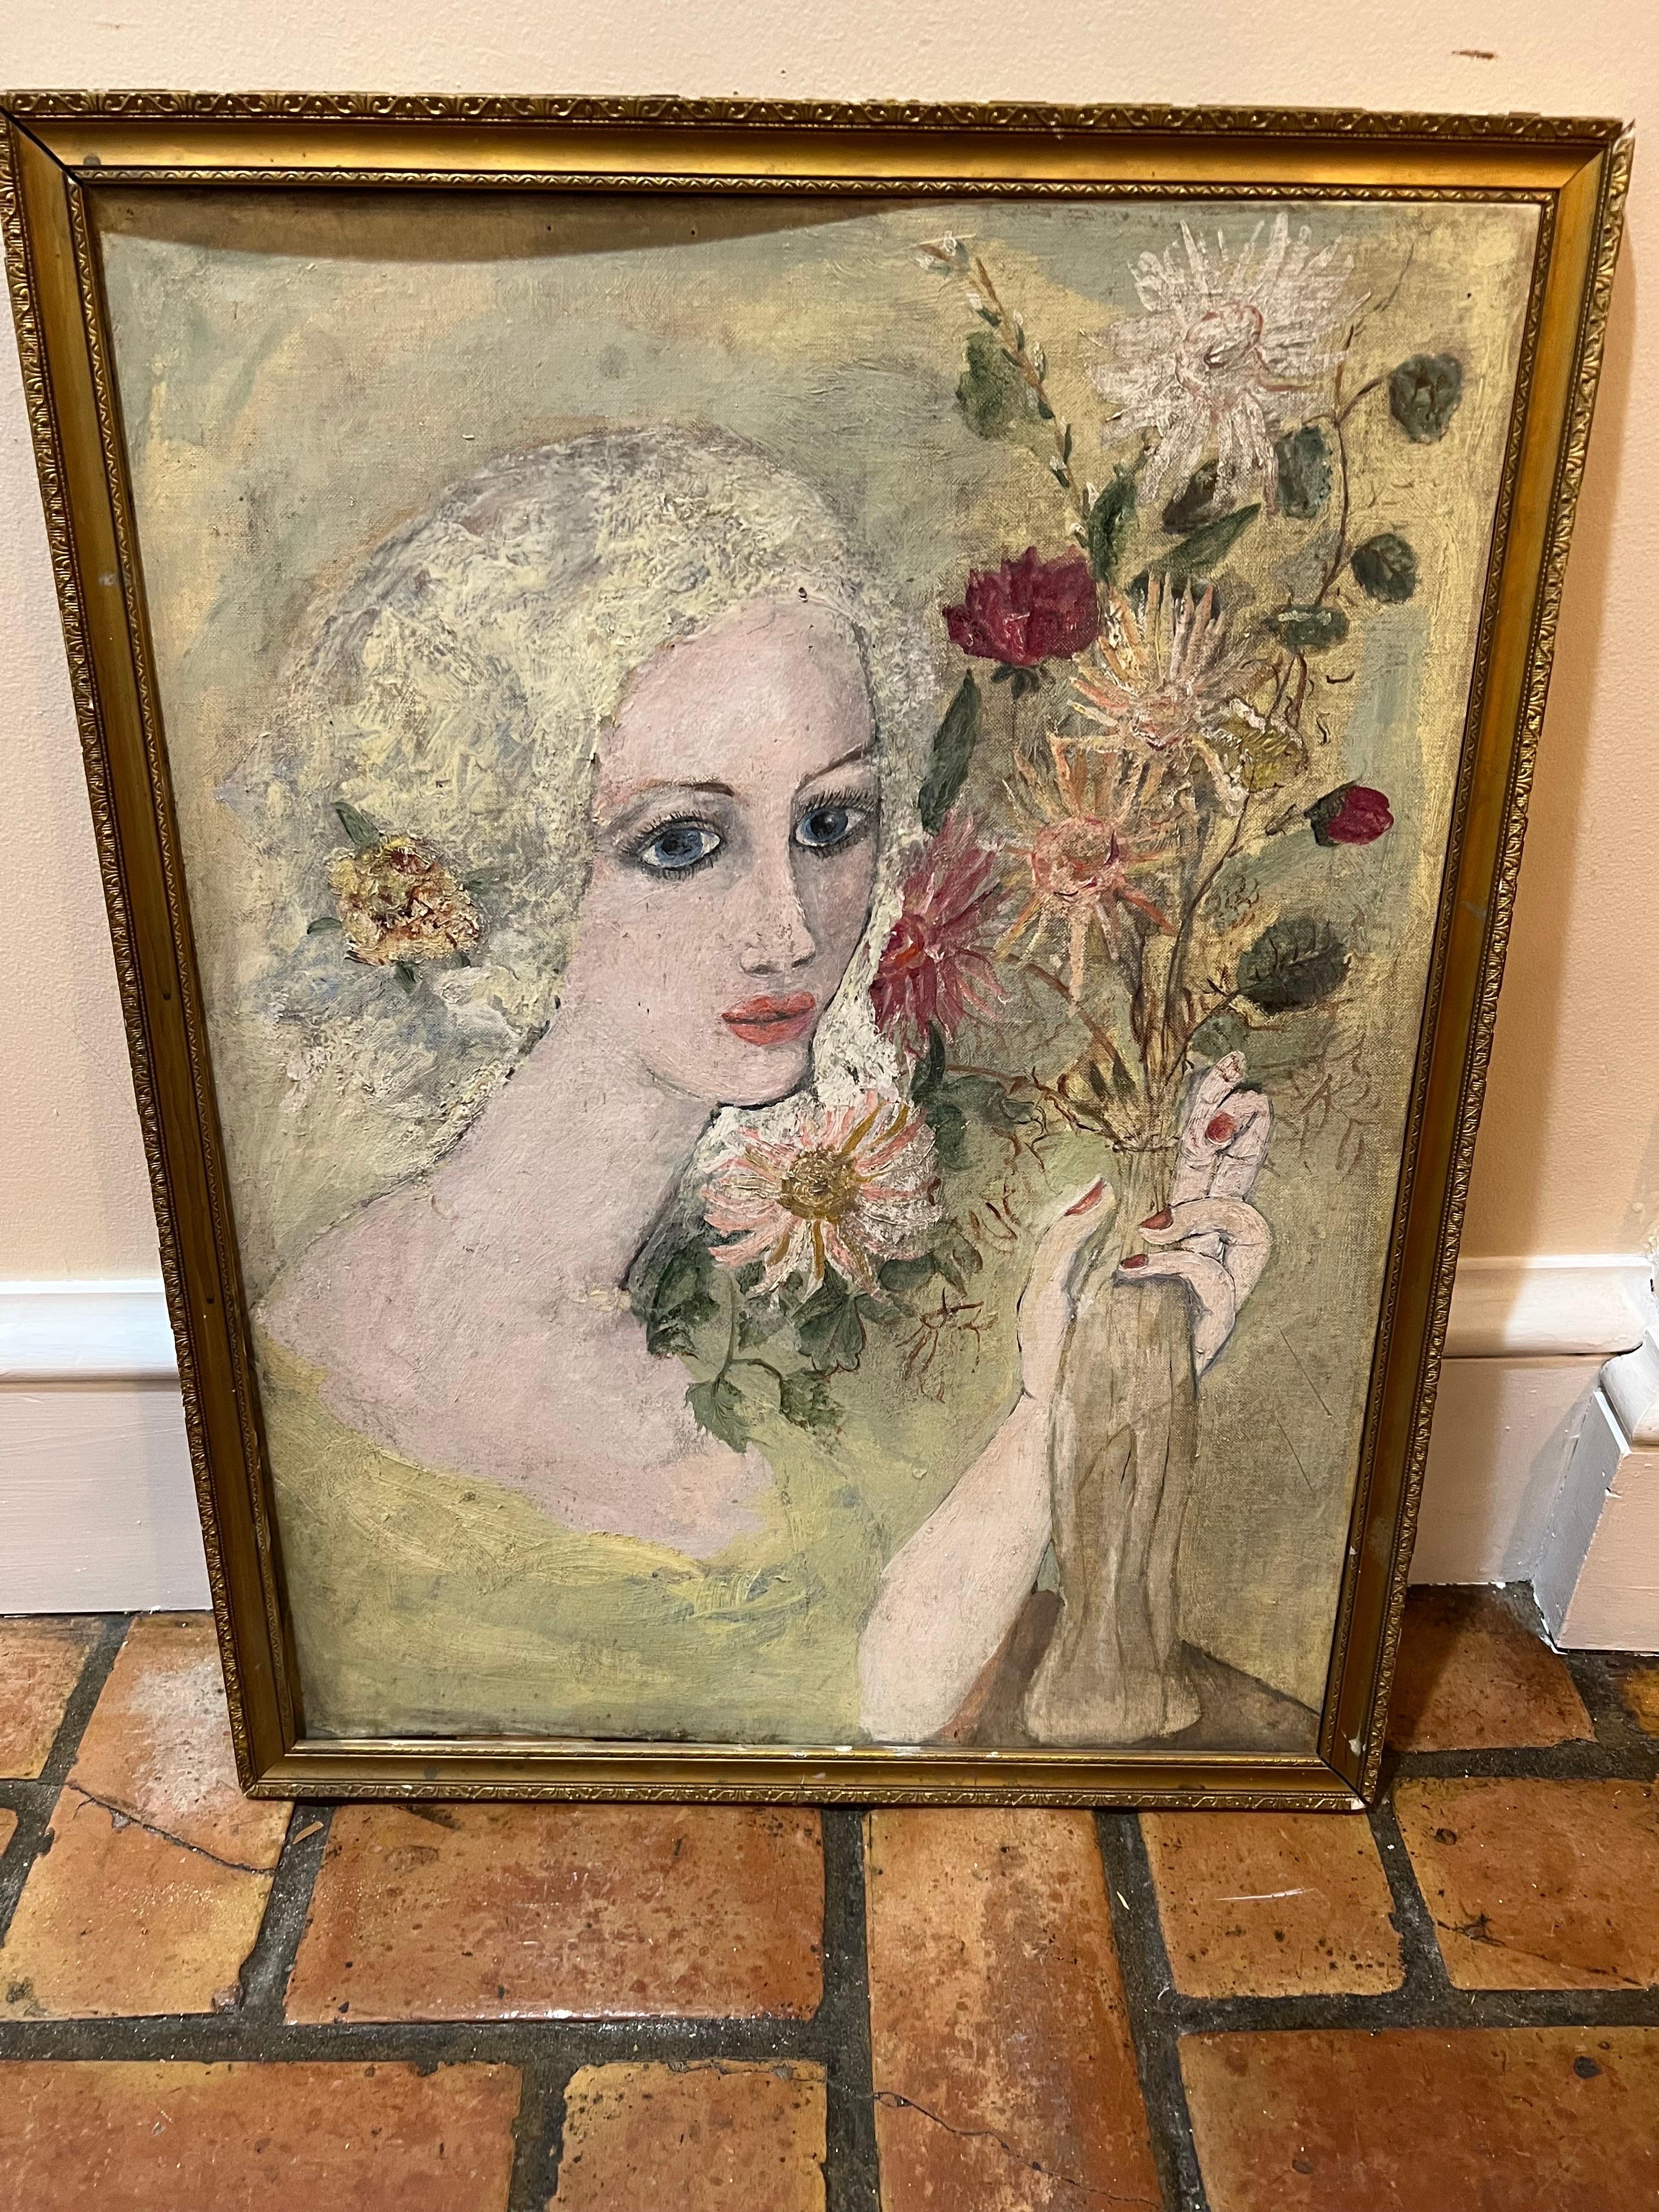 Signed painting of a woman by Julie V. Cross. Oil on board. Romantic style. Marked on the back that this piece was exhibited at the ACA Gallery at 63 East 57th Street NYC where she was a student.
This item will ship domestically via parcel for $29.